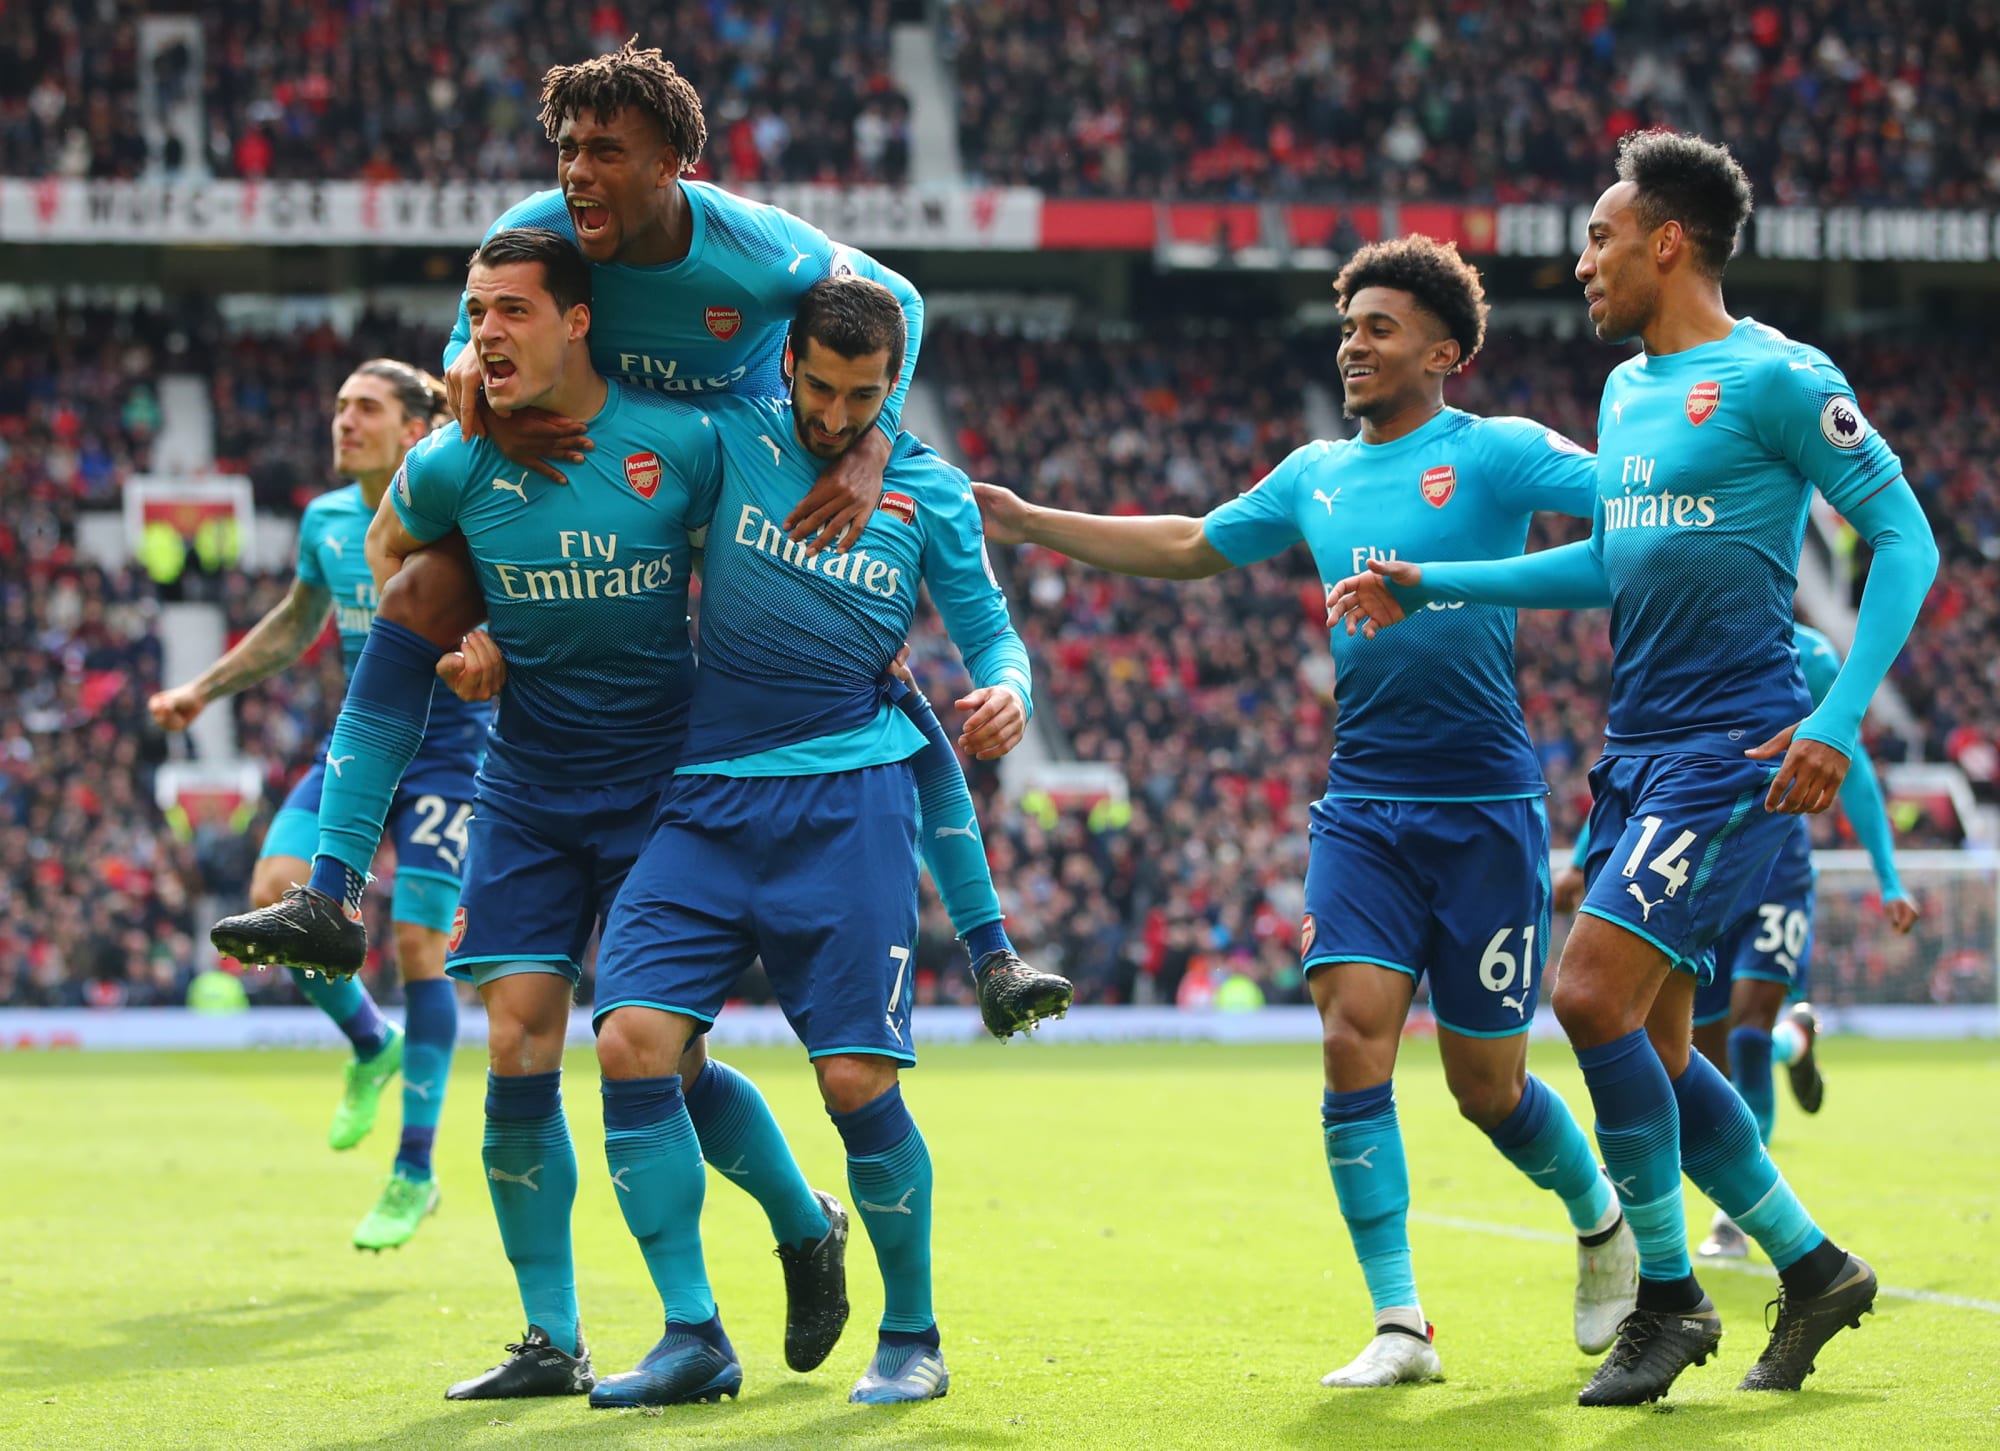 Arsenal Vs Manchester United: Highlights and analysis - Youthful